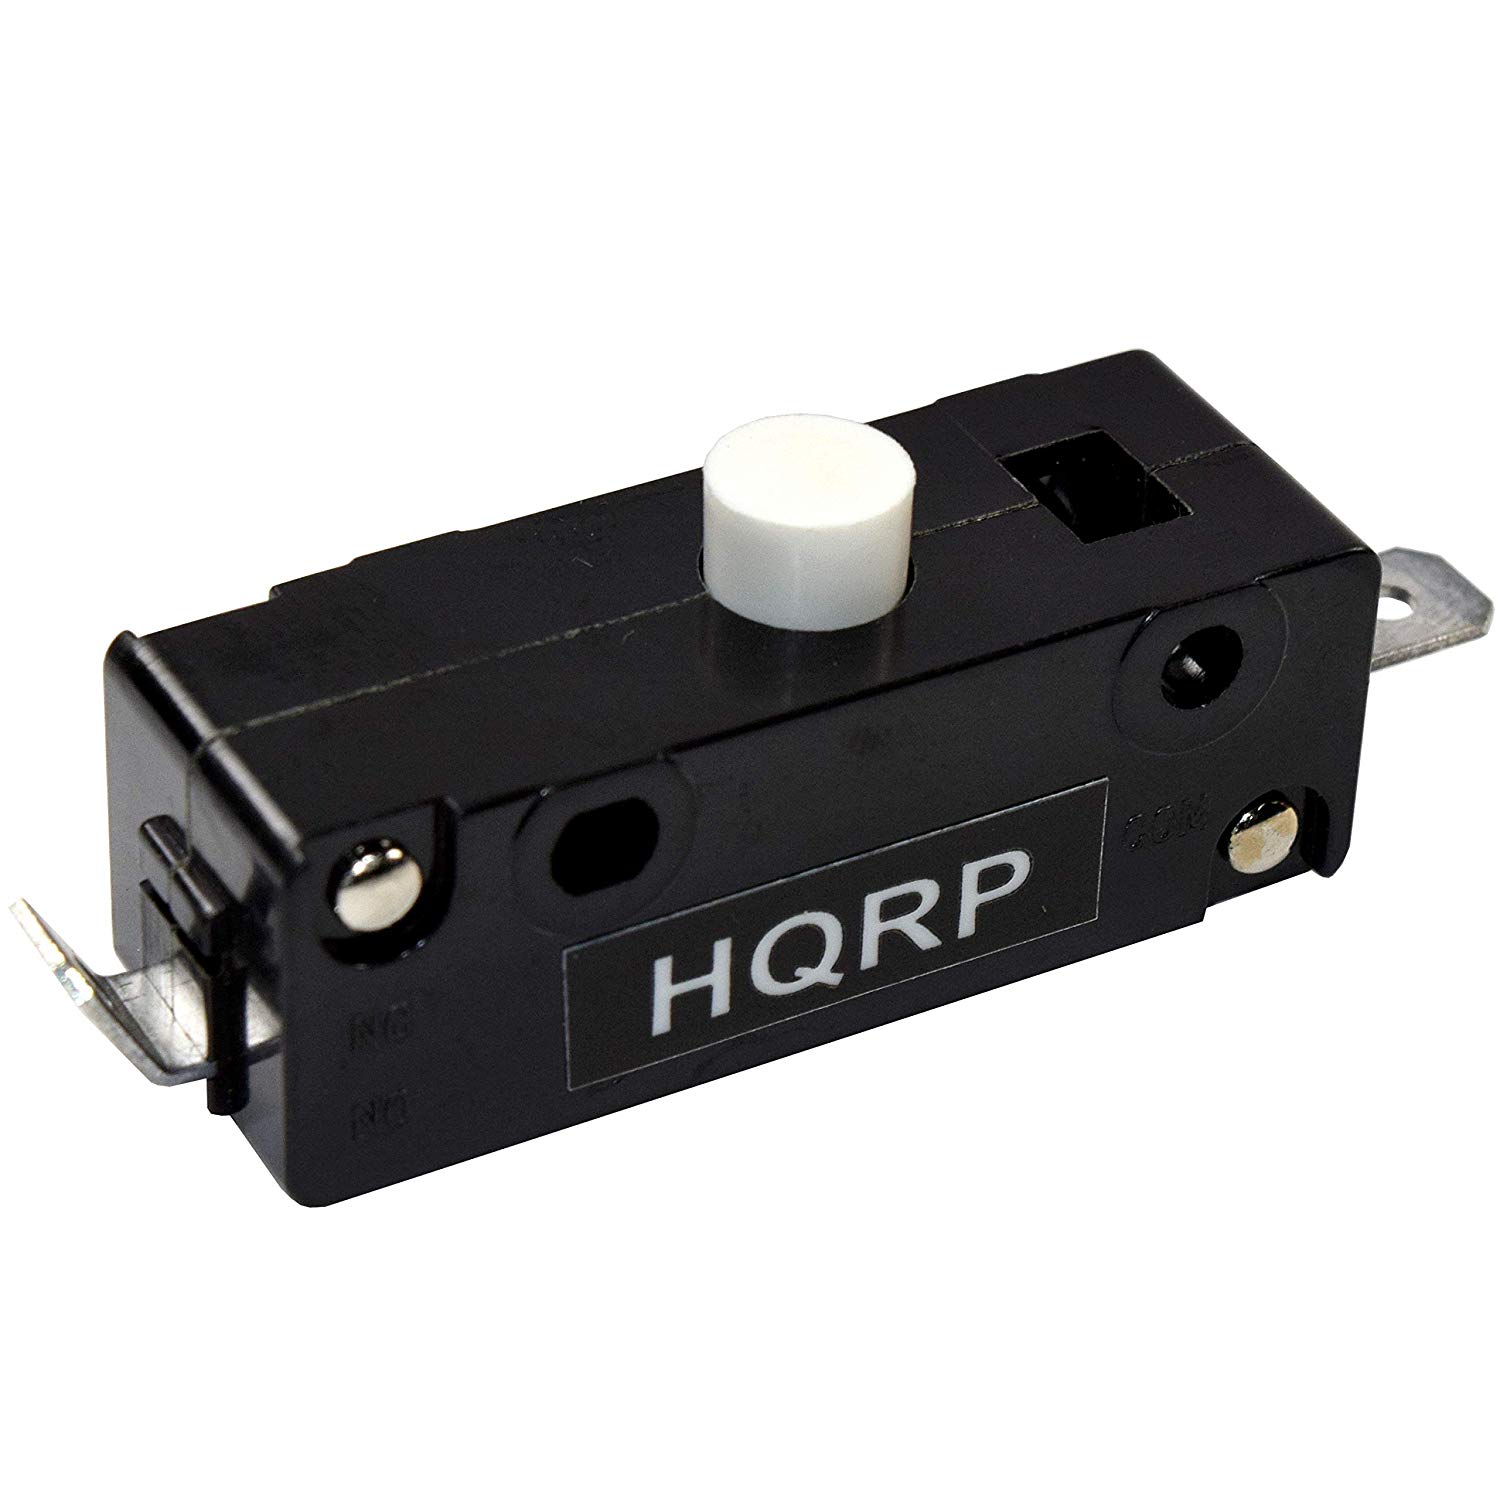 HQRP Push Button On-Off Switch for Cargo 112570, Oregon 33-738, STENS 435-615 Starter Switch 